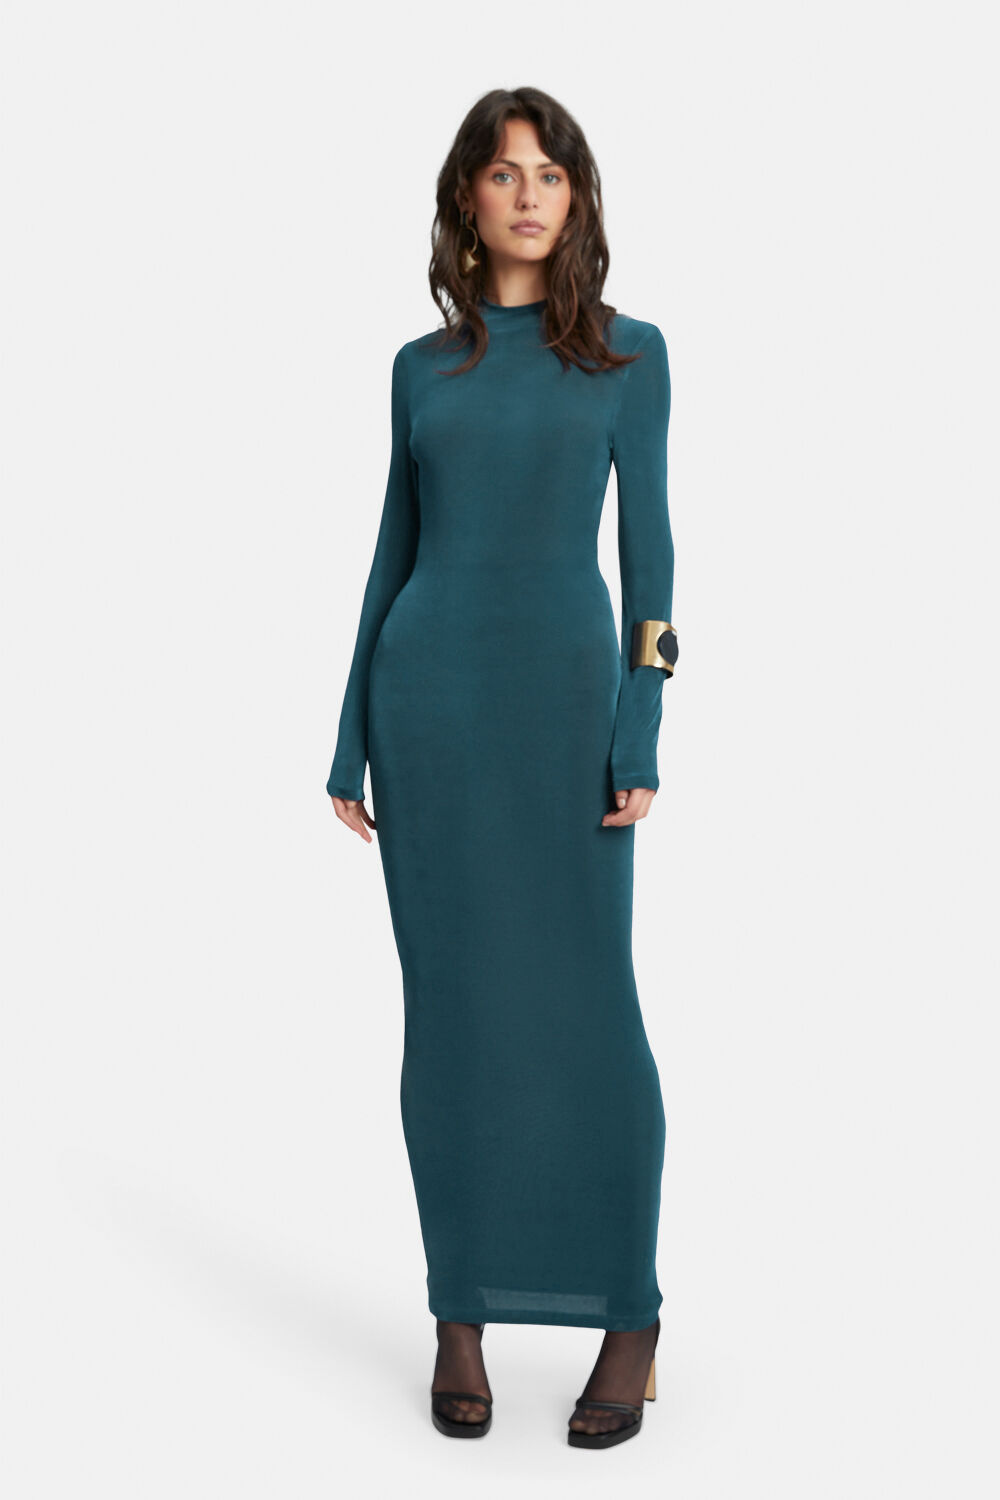 ARLO SLINKY KNIT DRESS in colour BAYBERRY